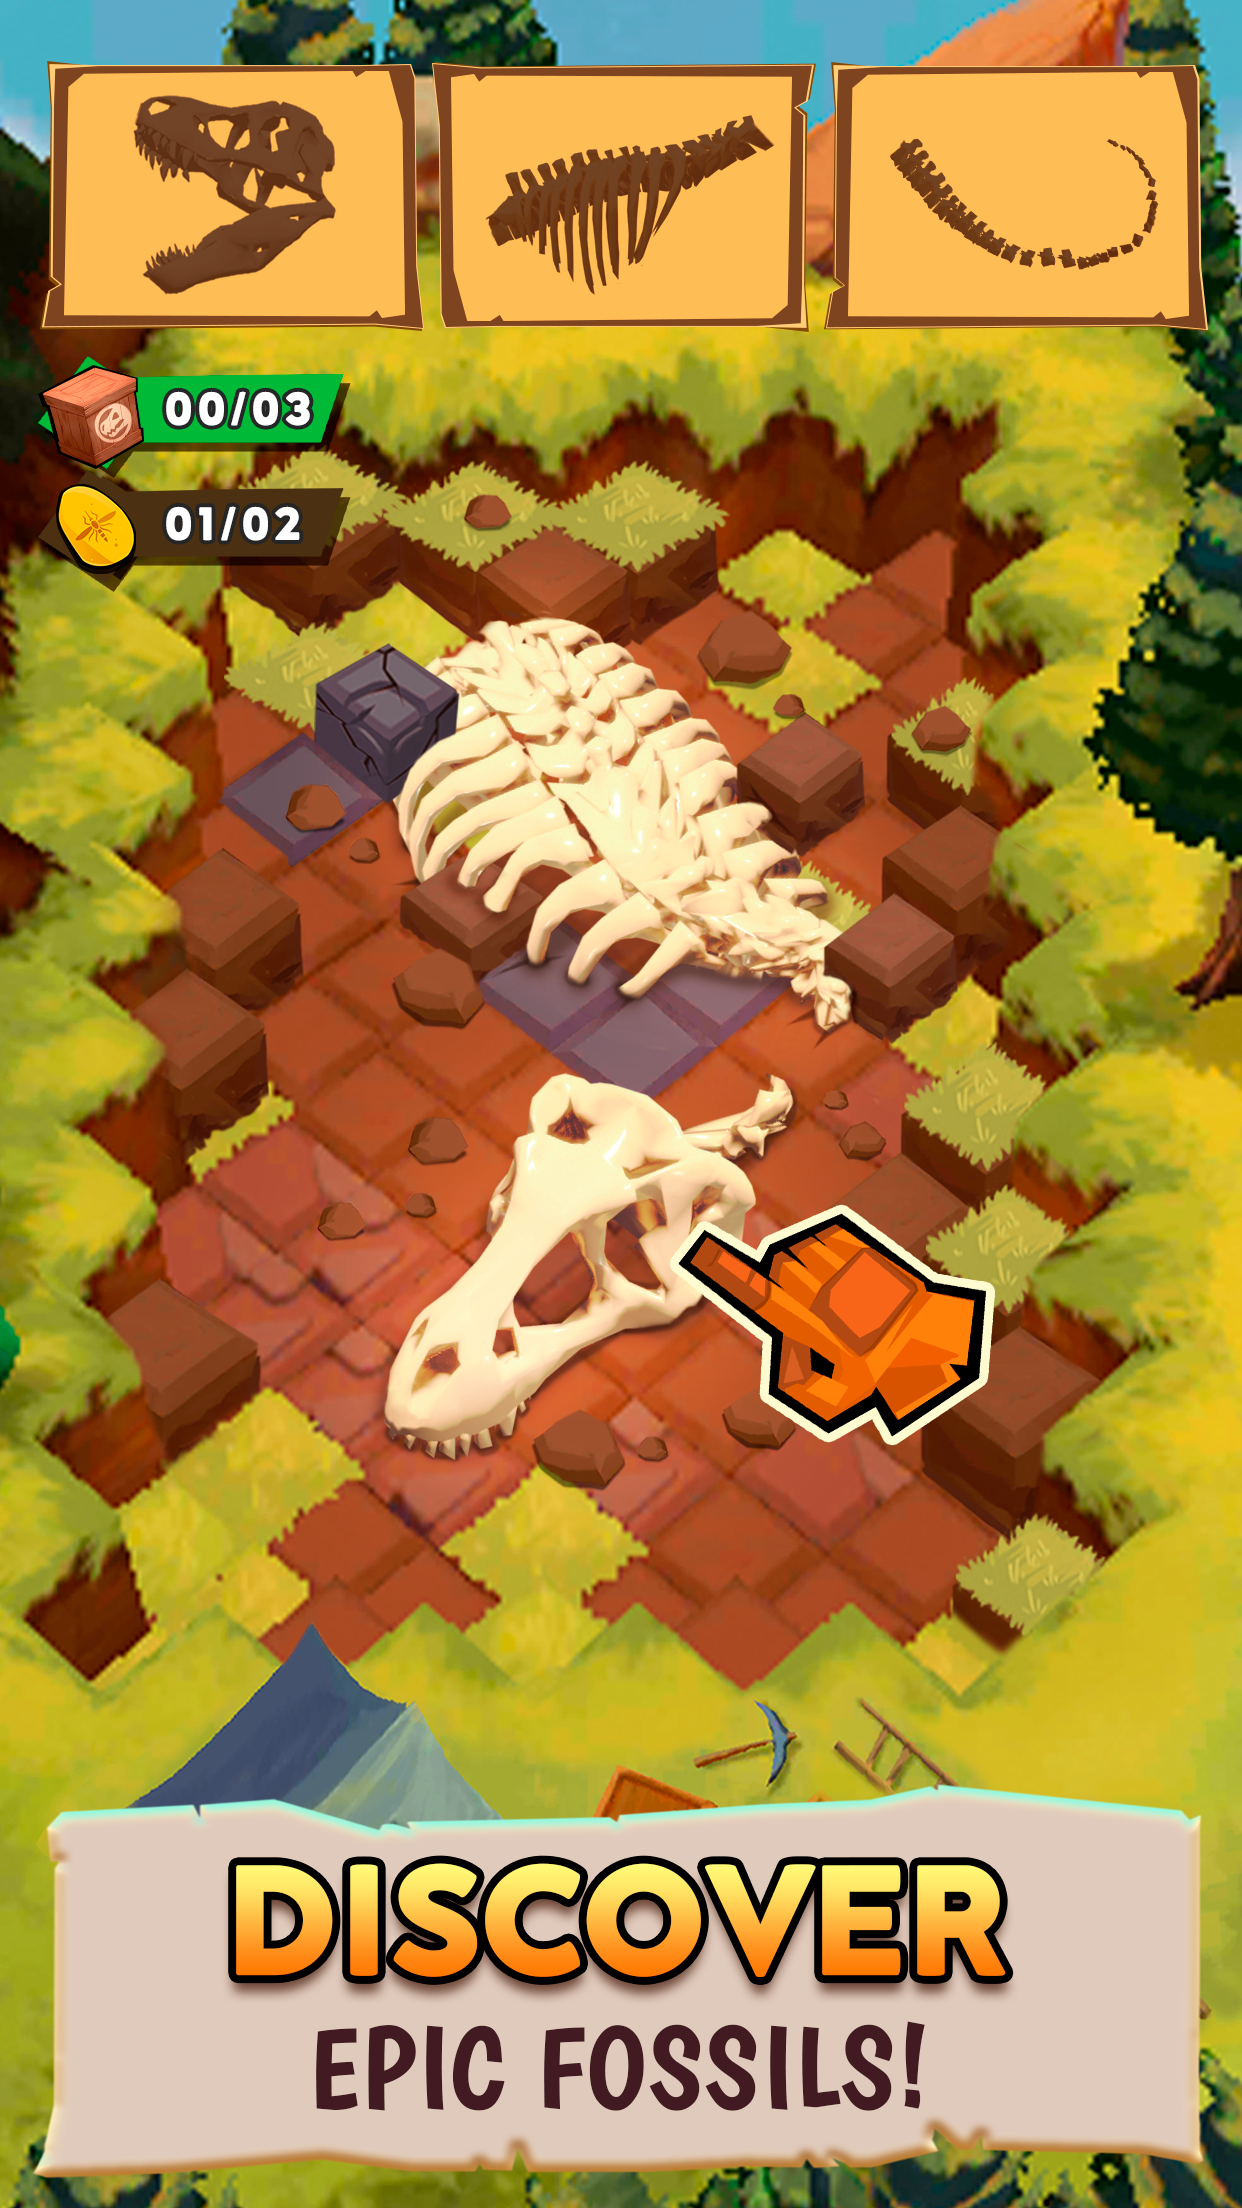 Screenshot 1 of Dino Quest 2 Dinosaure Fossile 1.23.14